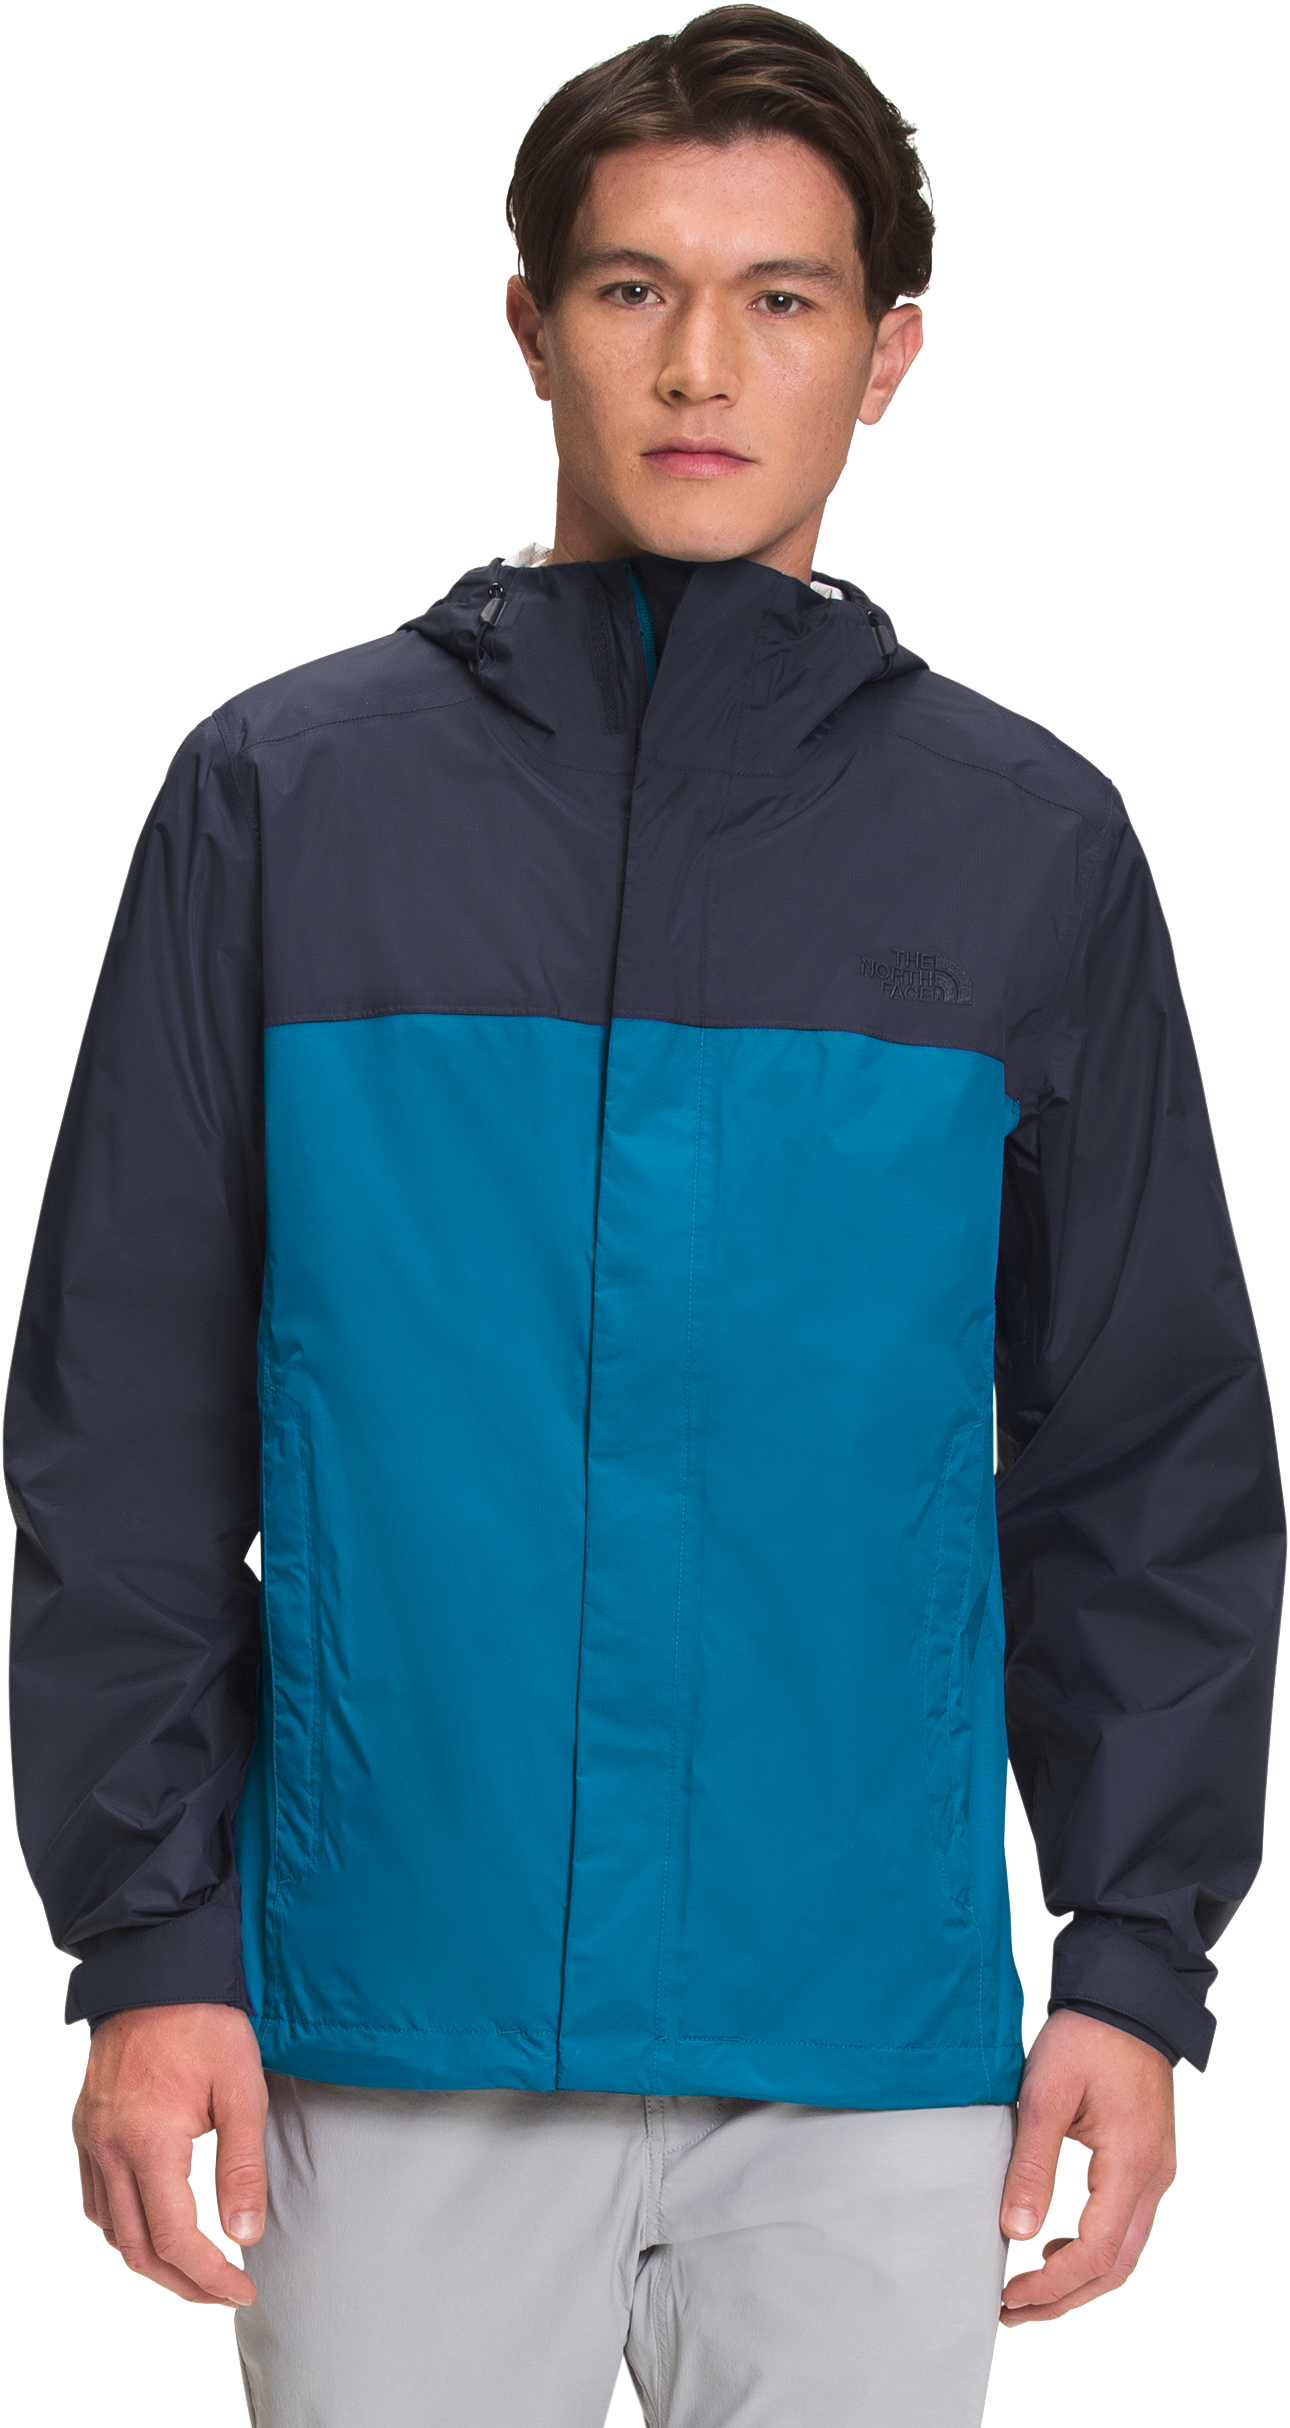 The North Face Venture 2 Jacket for Men